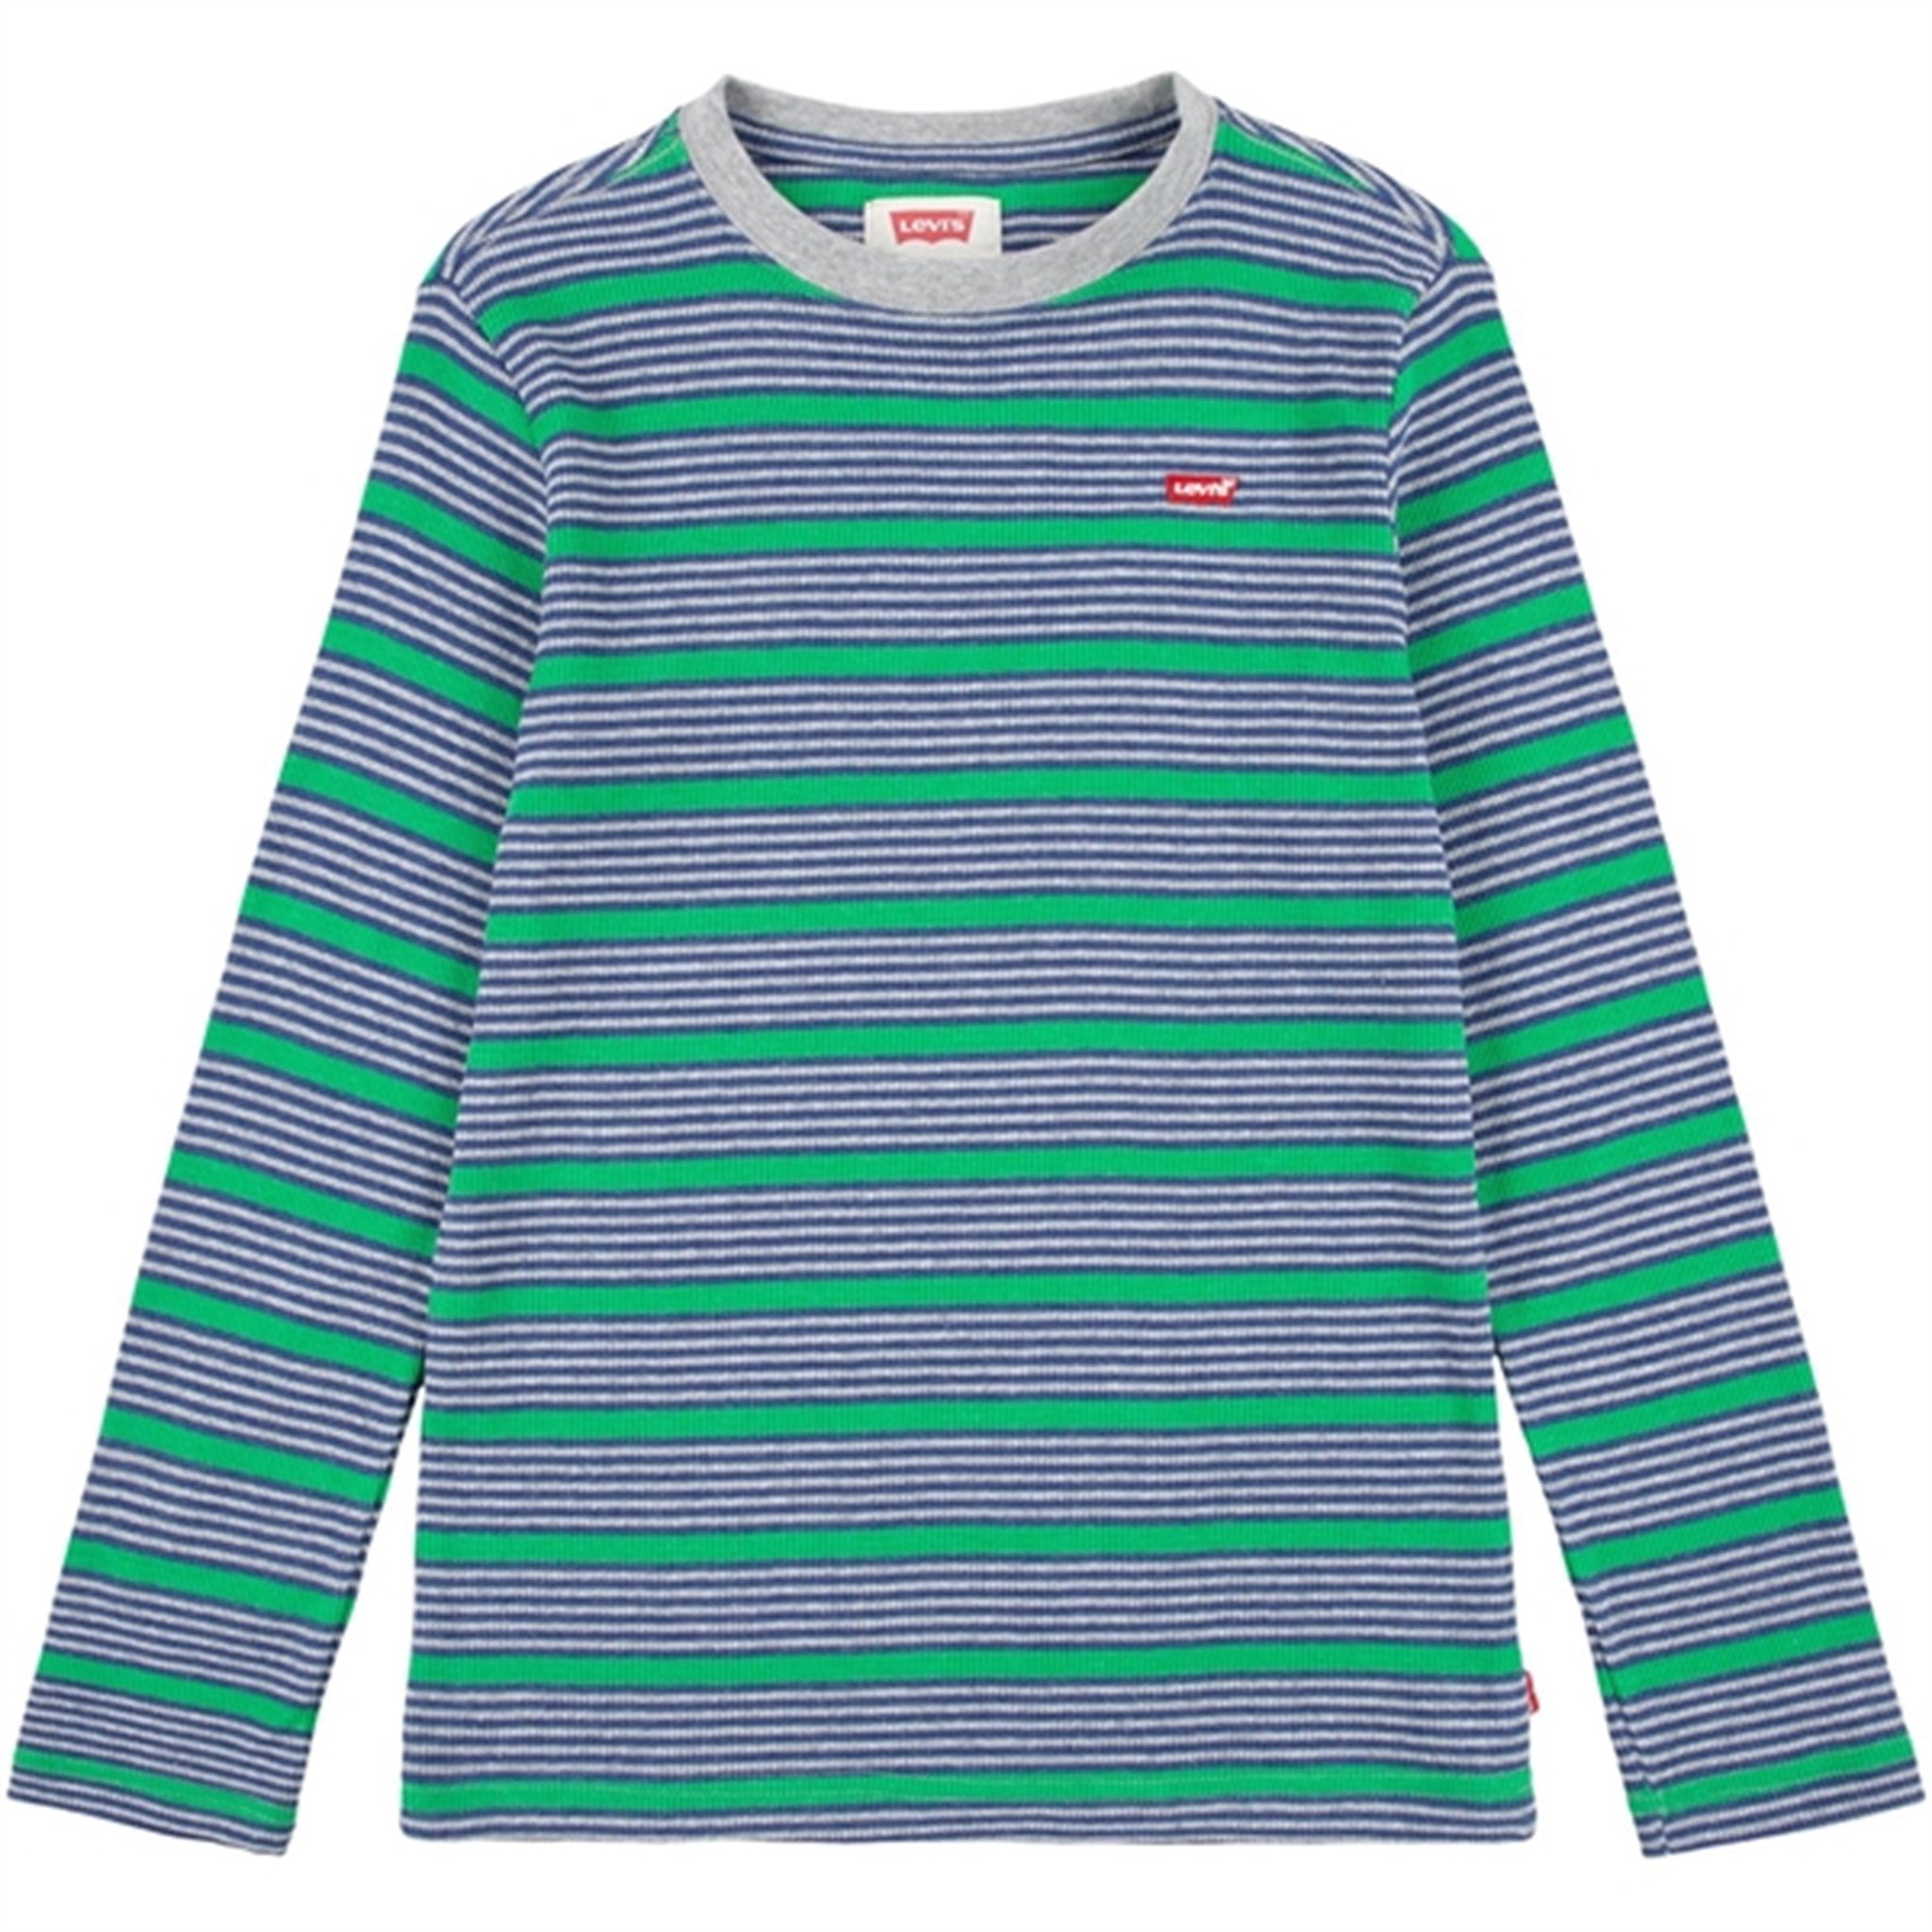 Levi's Long Sleeve Striped Thermal T-Shirt Grey Heather